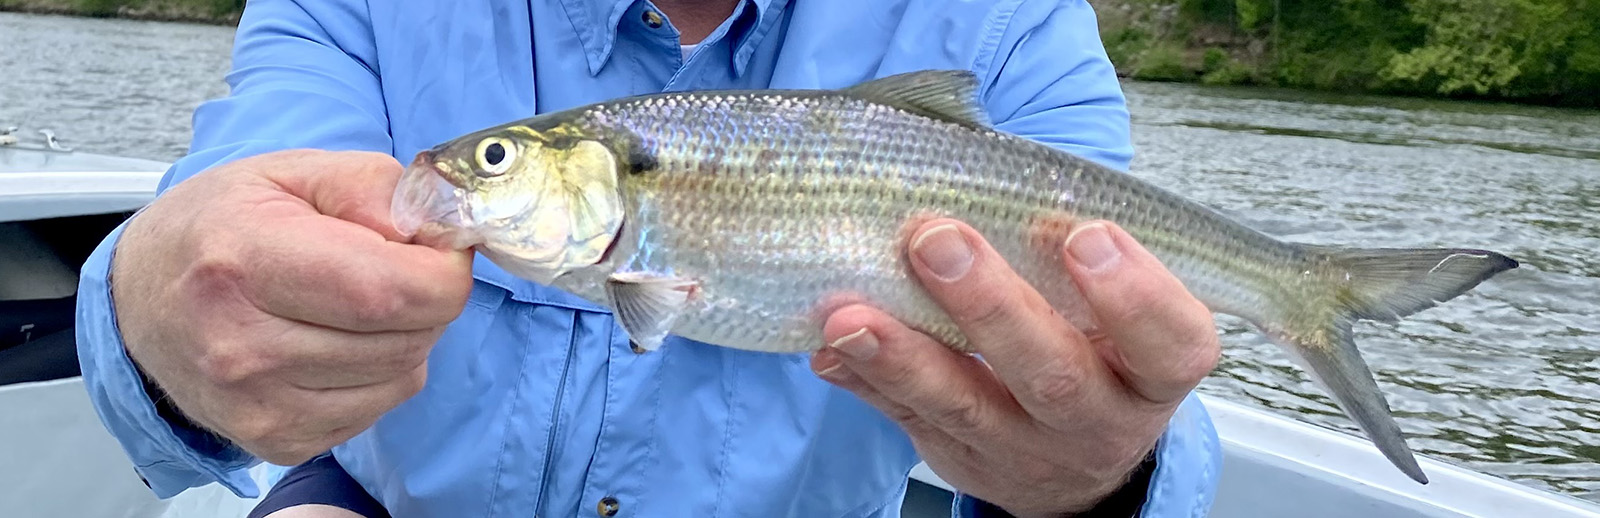 A photo of a man's hands holding a hickory shad.